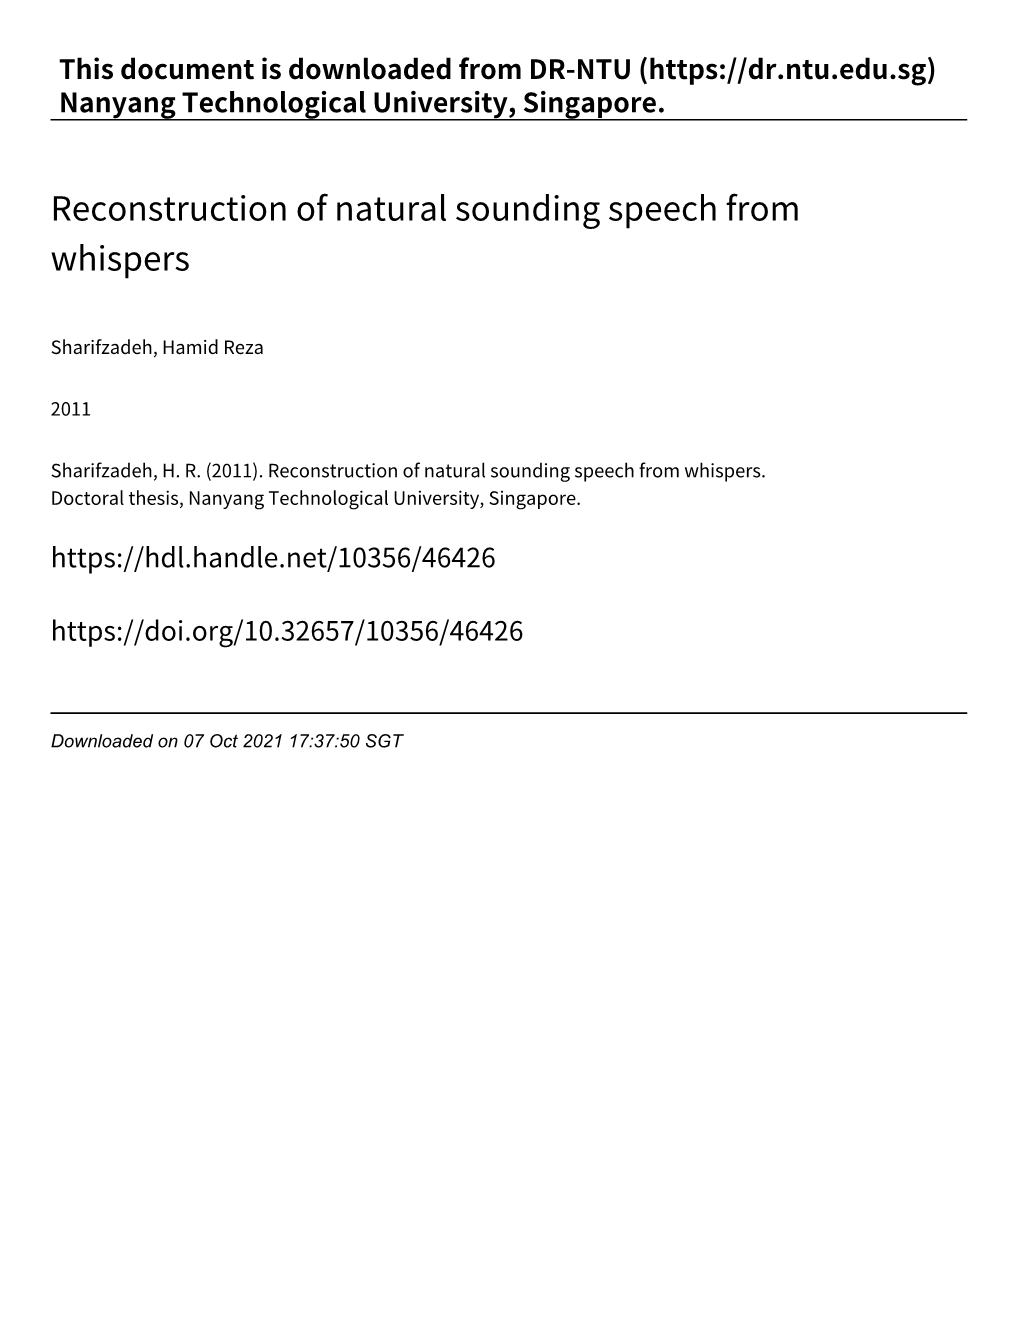 Reconstruction of Natural Sounding Speech from Whispers